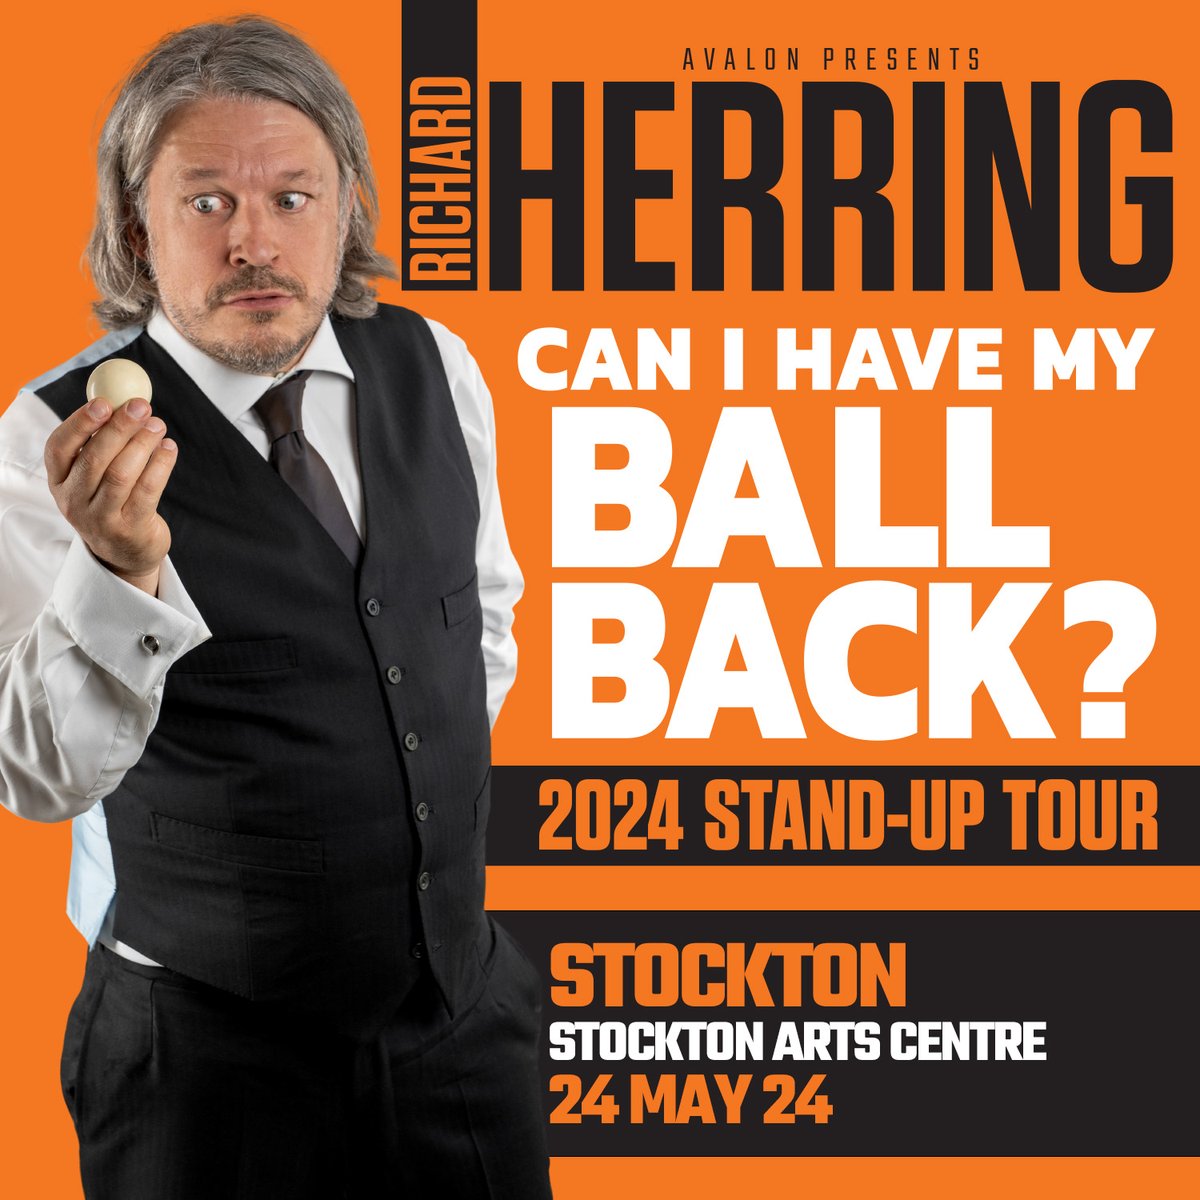 After six years, @Herring1967 makes his long-awaited return to stand-up with his latest show, Can I Have My Ball Back? Catch him at ARC on Fri 24 May! 🎟️ arconline.co.uk/whats-on/richa…